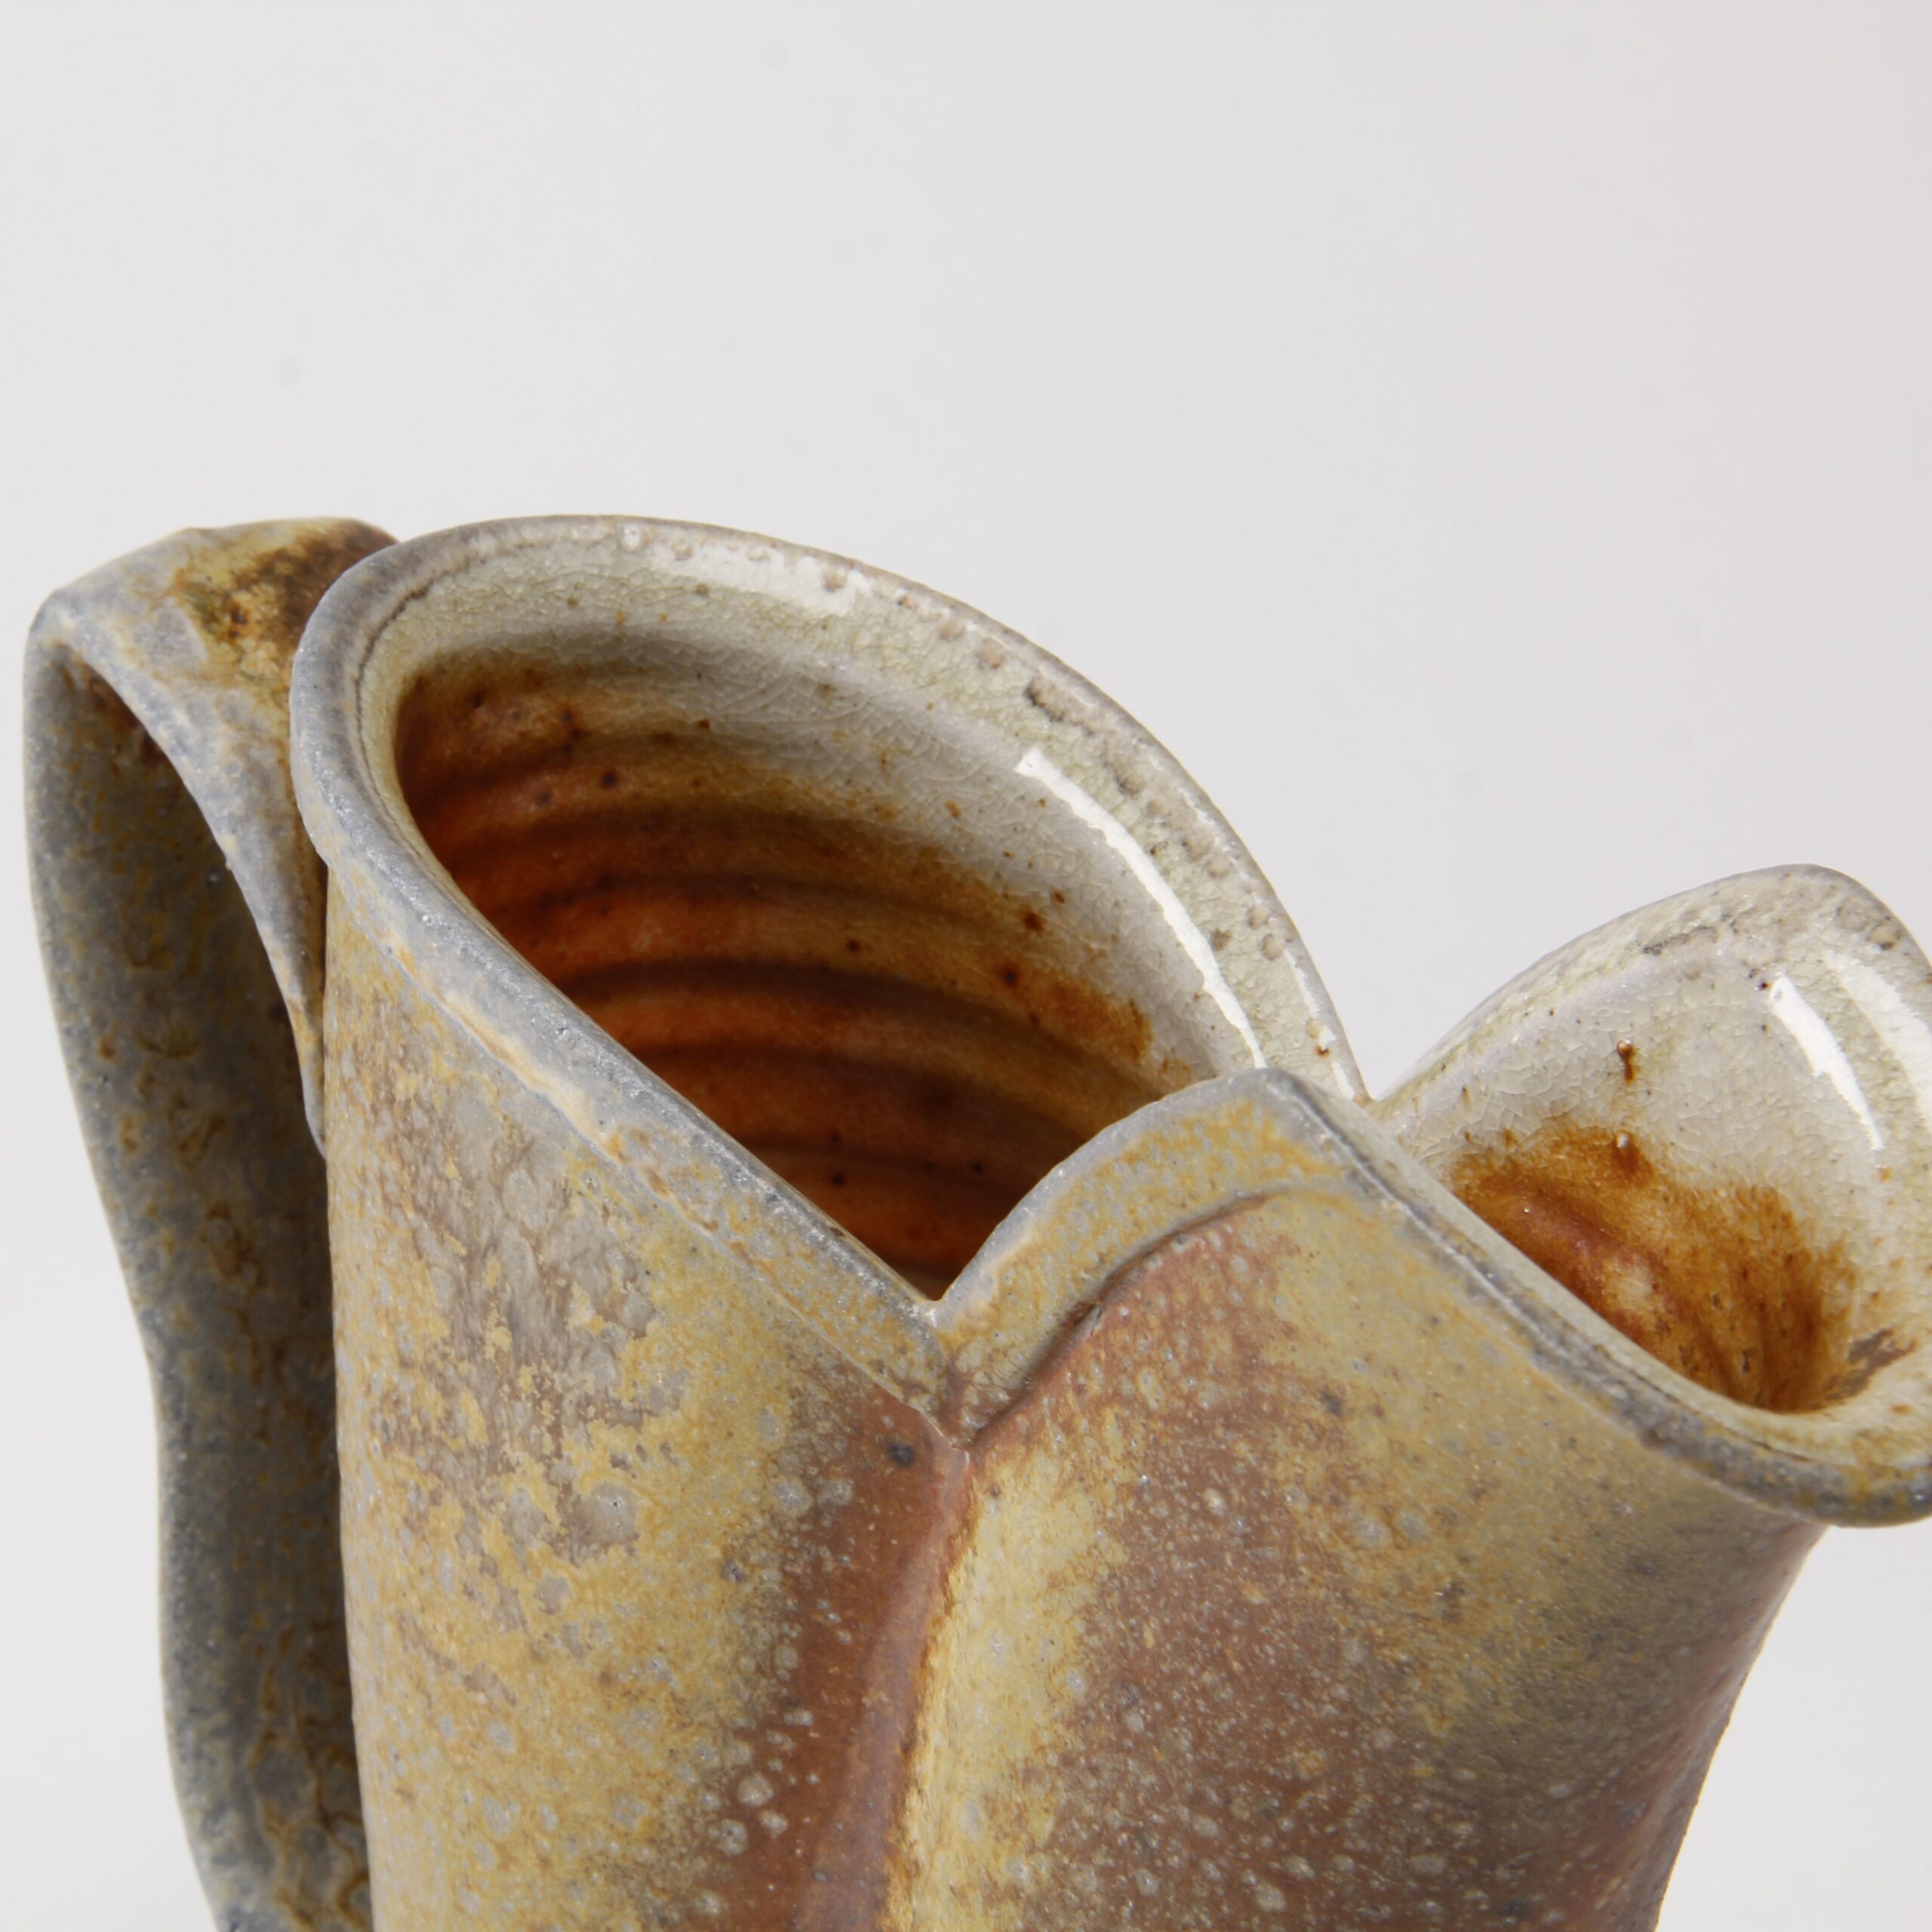 Bruce Cochrane: Rust Pitcher Product Image 3 of 5